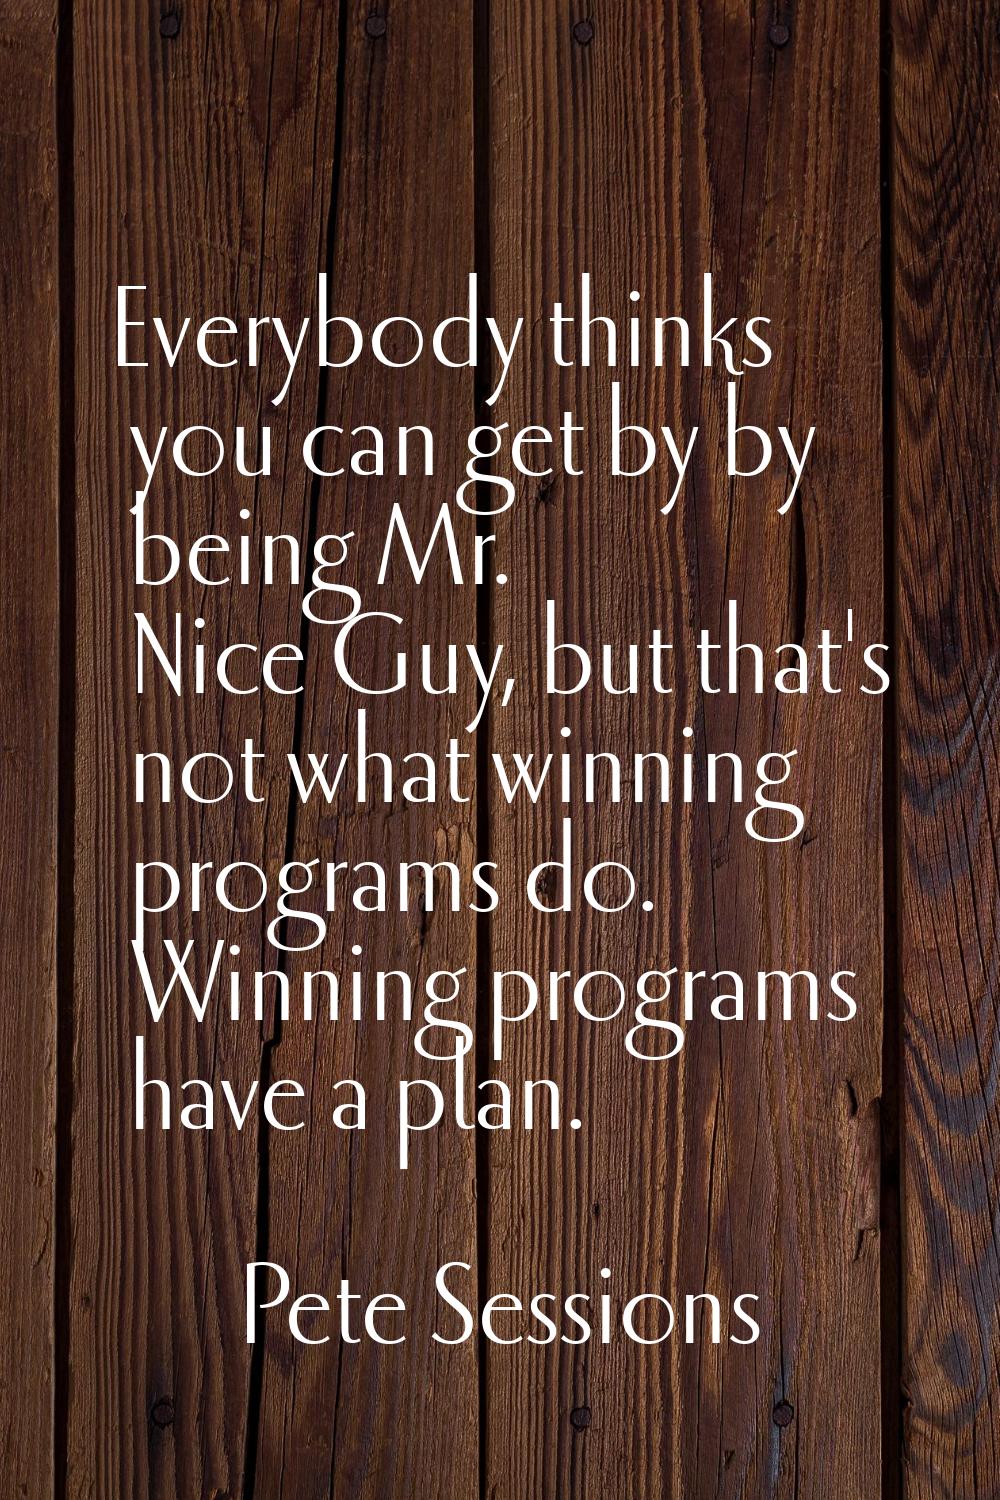 Everybody thinks you can get by by being Mr. Nice Guy, but that's not what winning programs do. Win